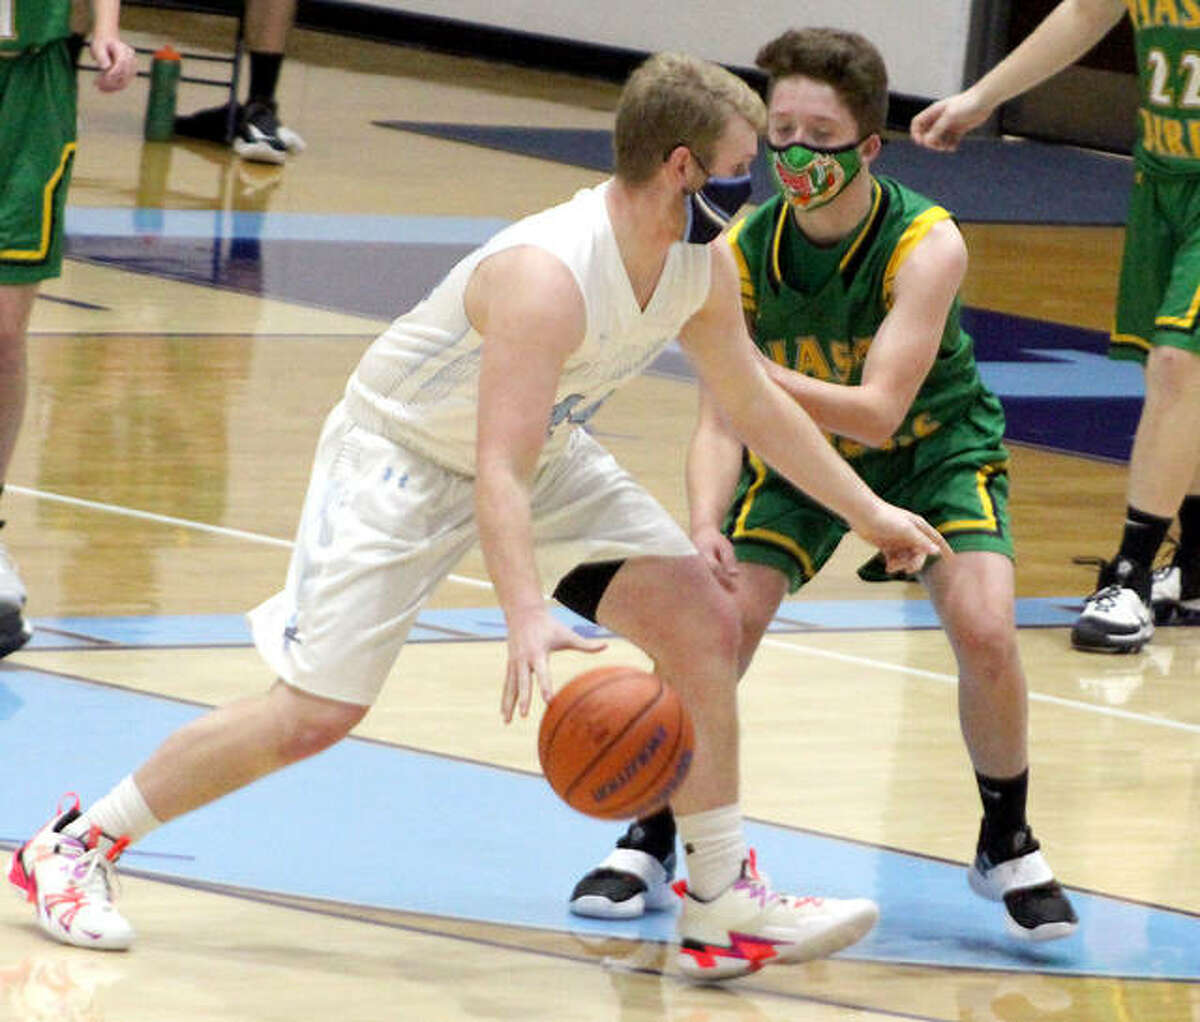 CJ Brunaugh of Jersey, left, scored 11 points for the Panthers in Tuesday night’s 42-39 Mississippi Valley Conference loss to Highland at Havens Gym. He is shown in action earlier this season against Southwestern.